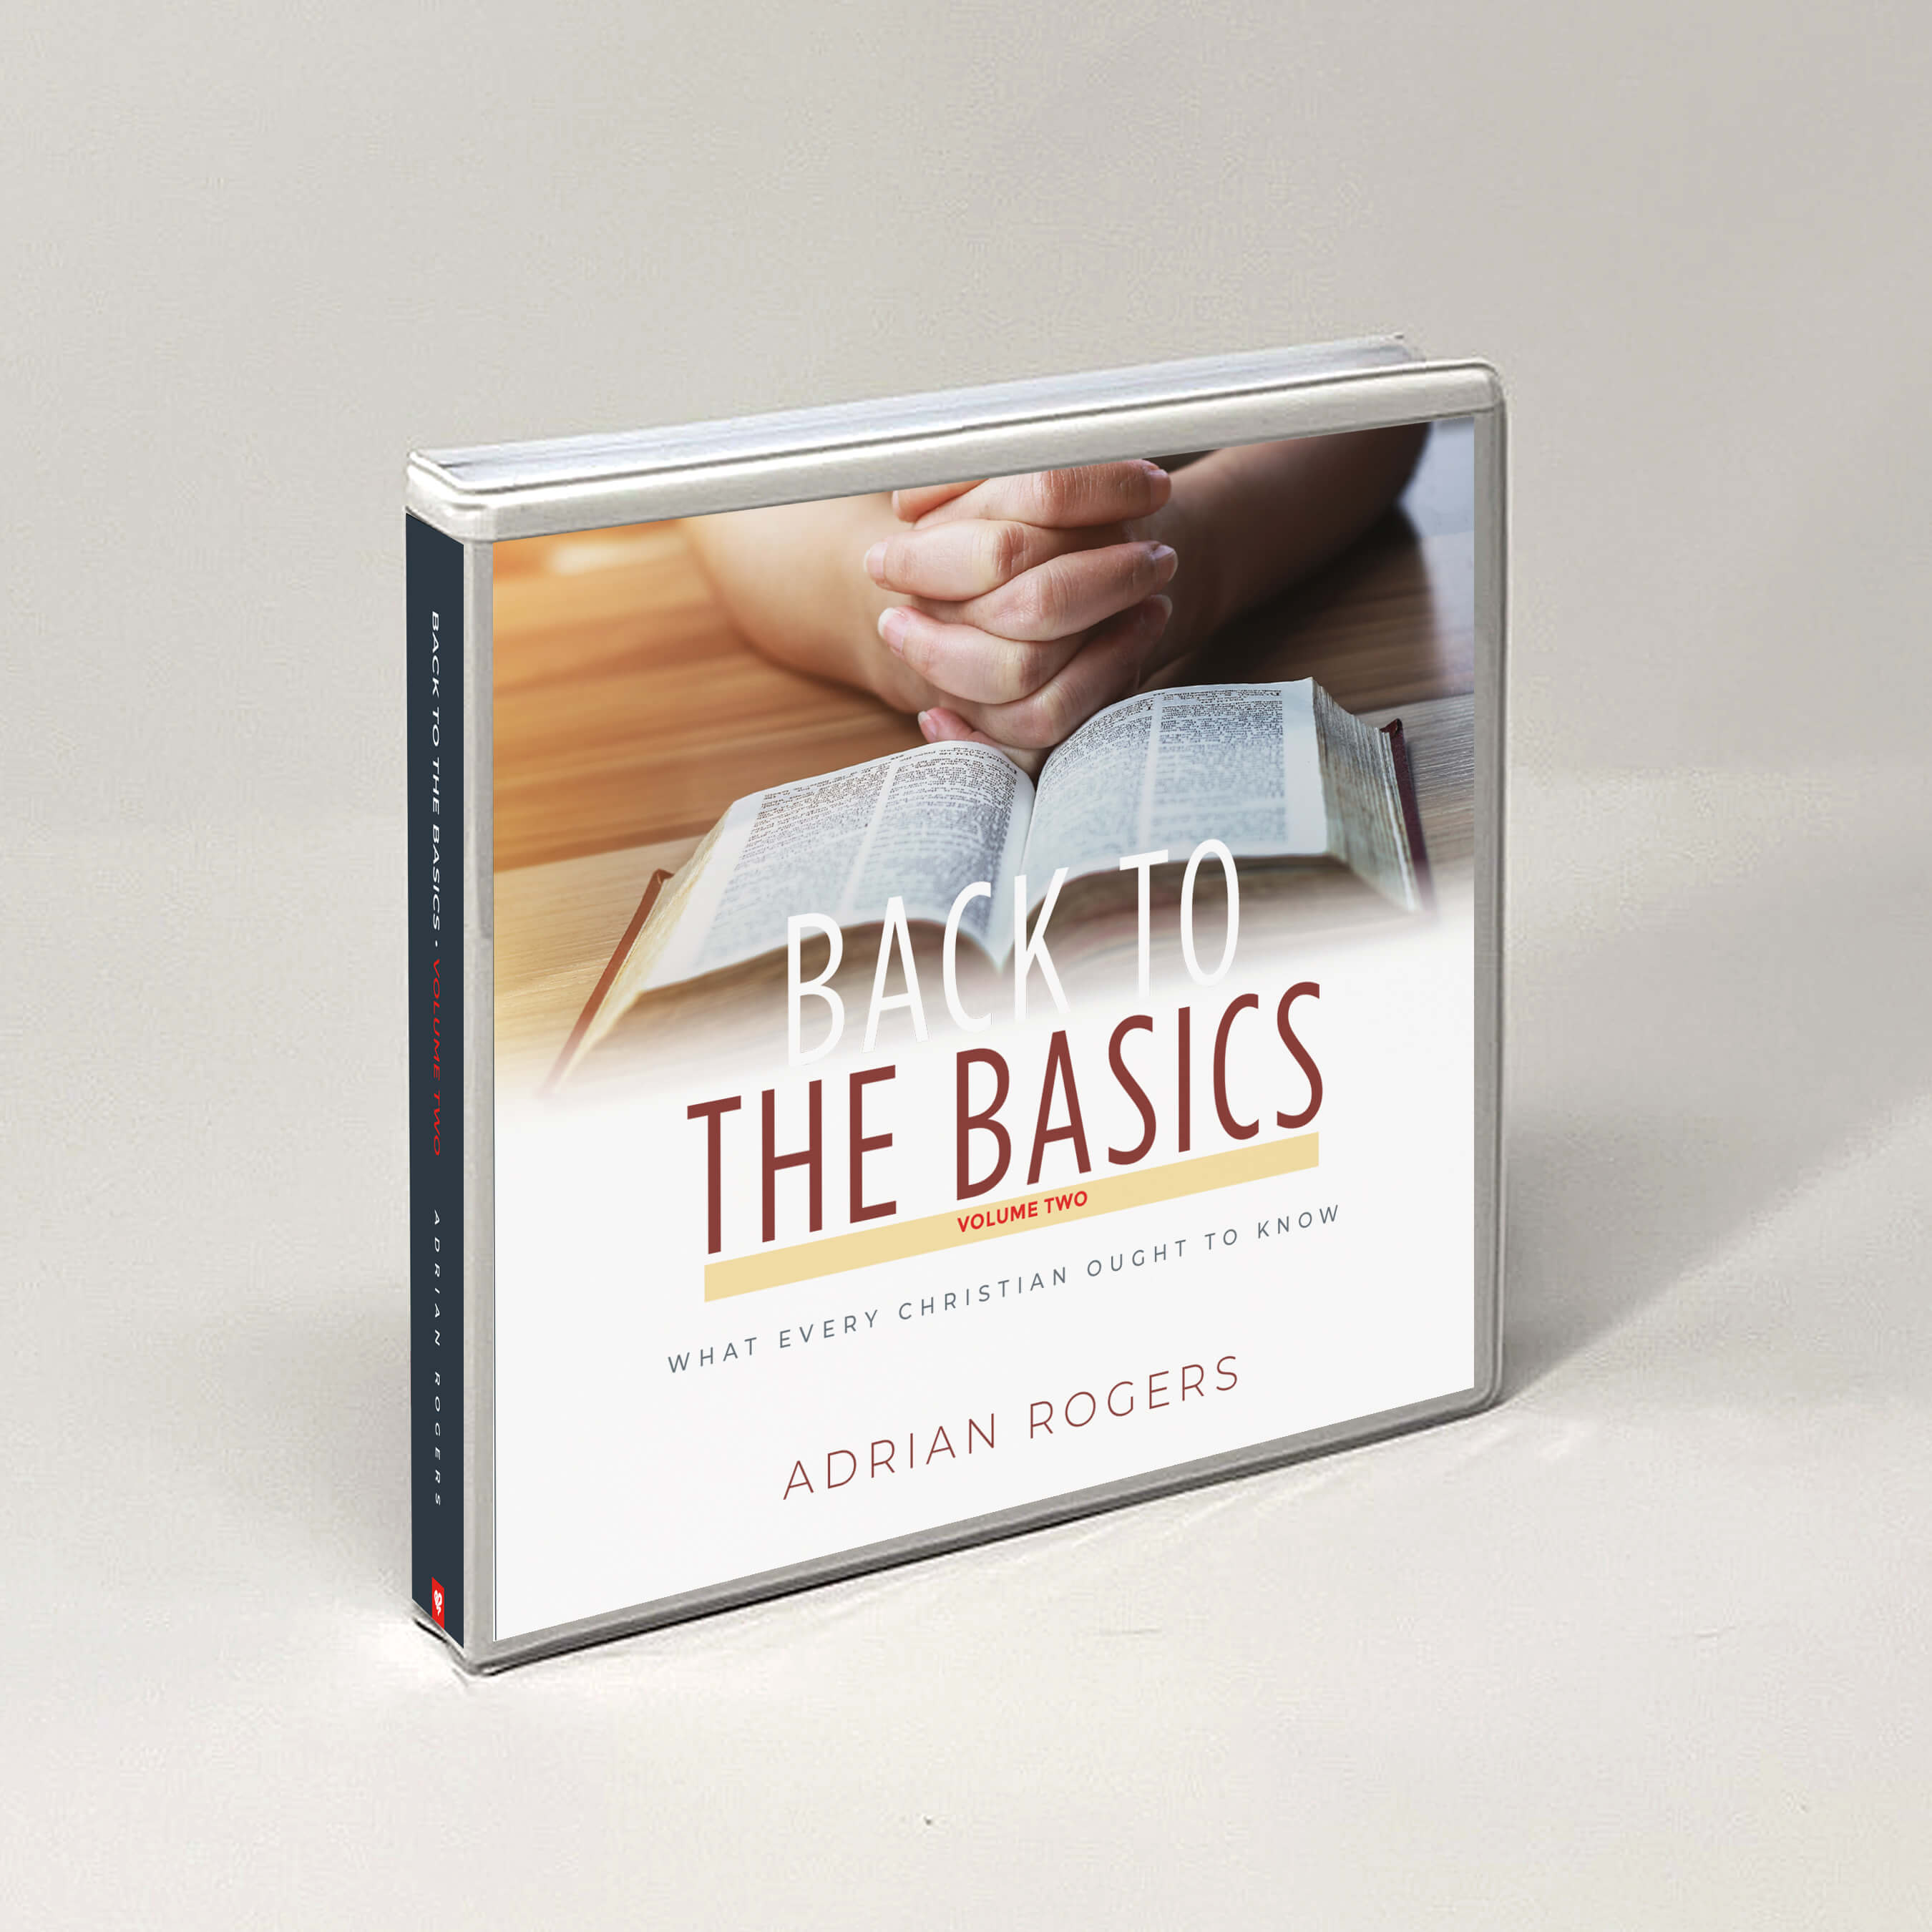 Back To The Basics Series